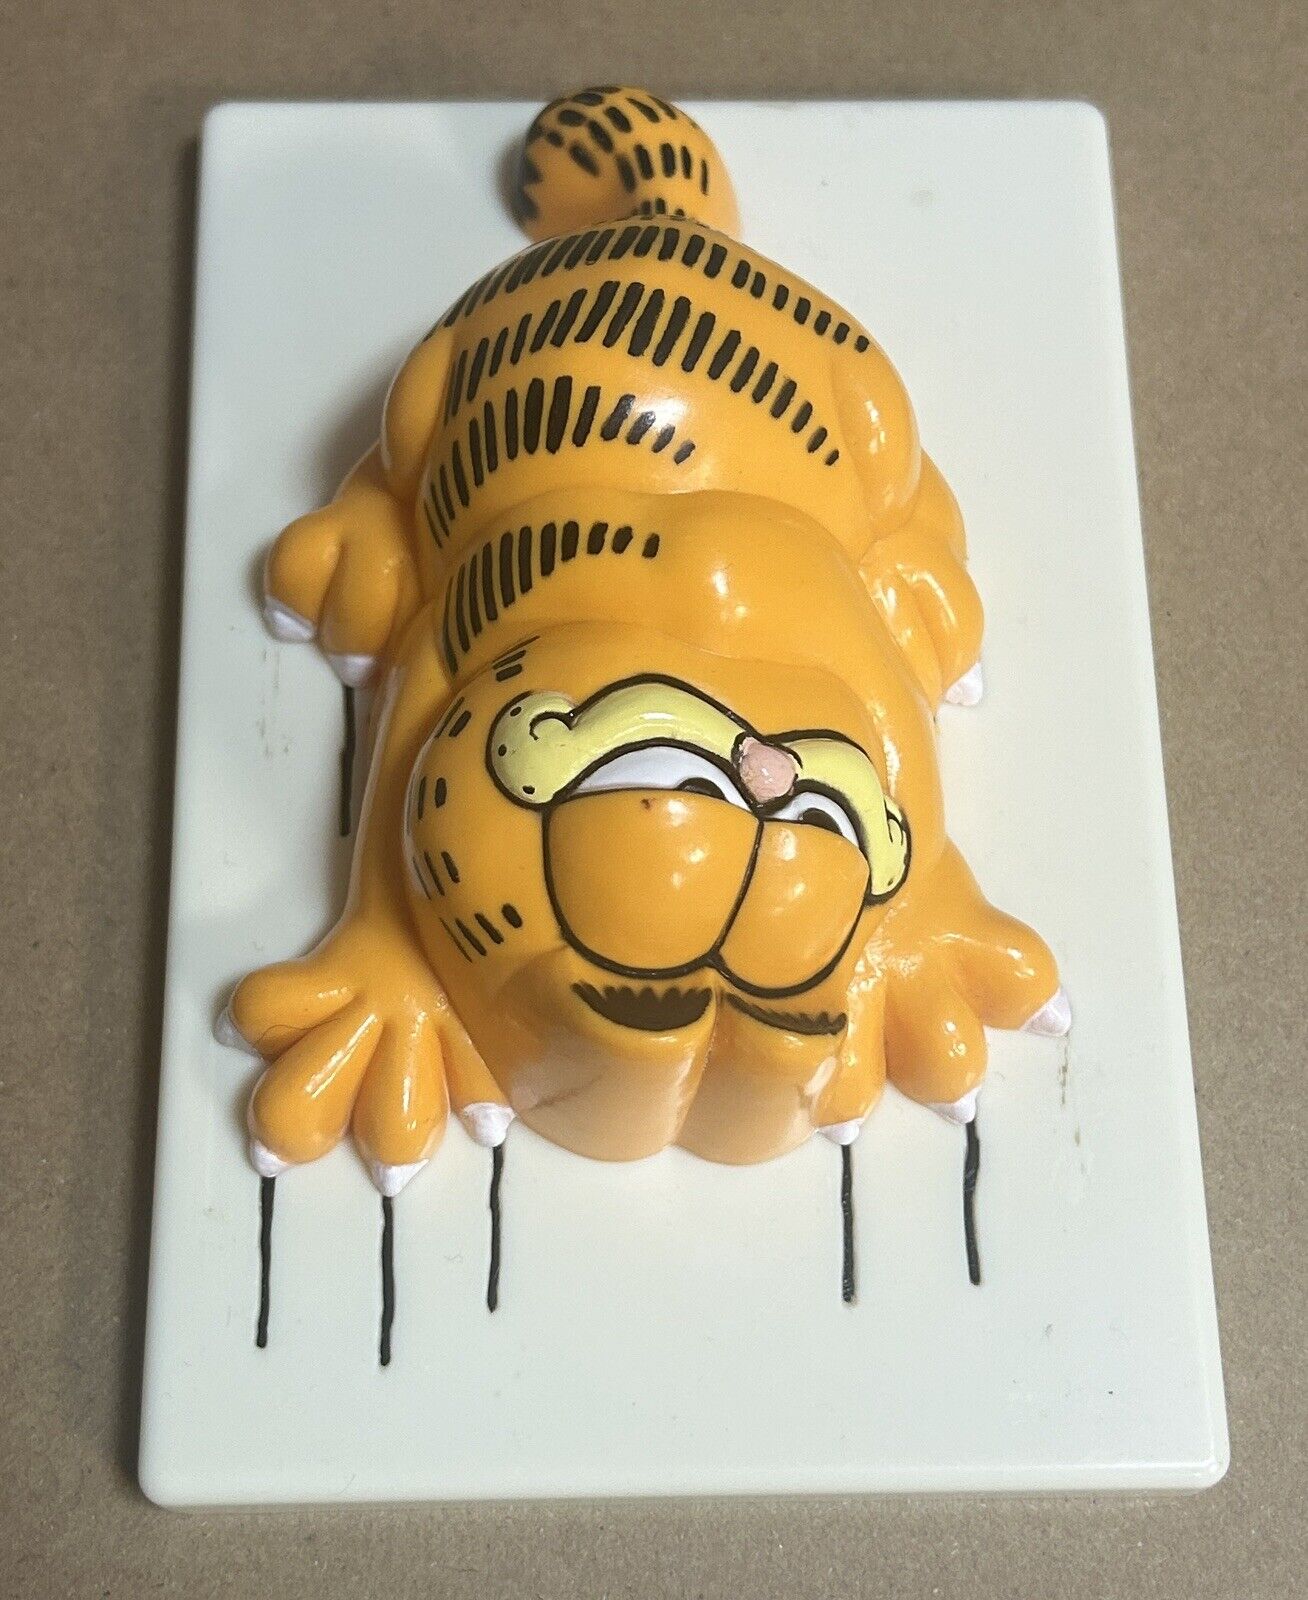 Garfield: Off The Wall Cat - Light Switch Plate Cover, Vintage 1980’s